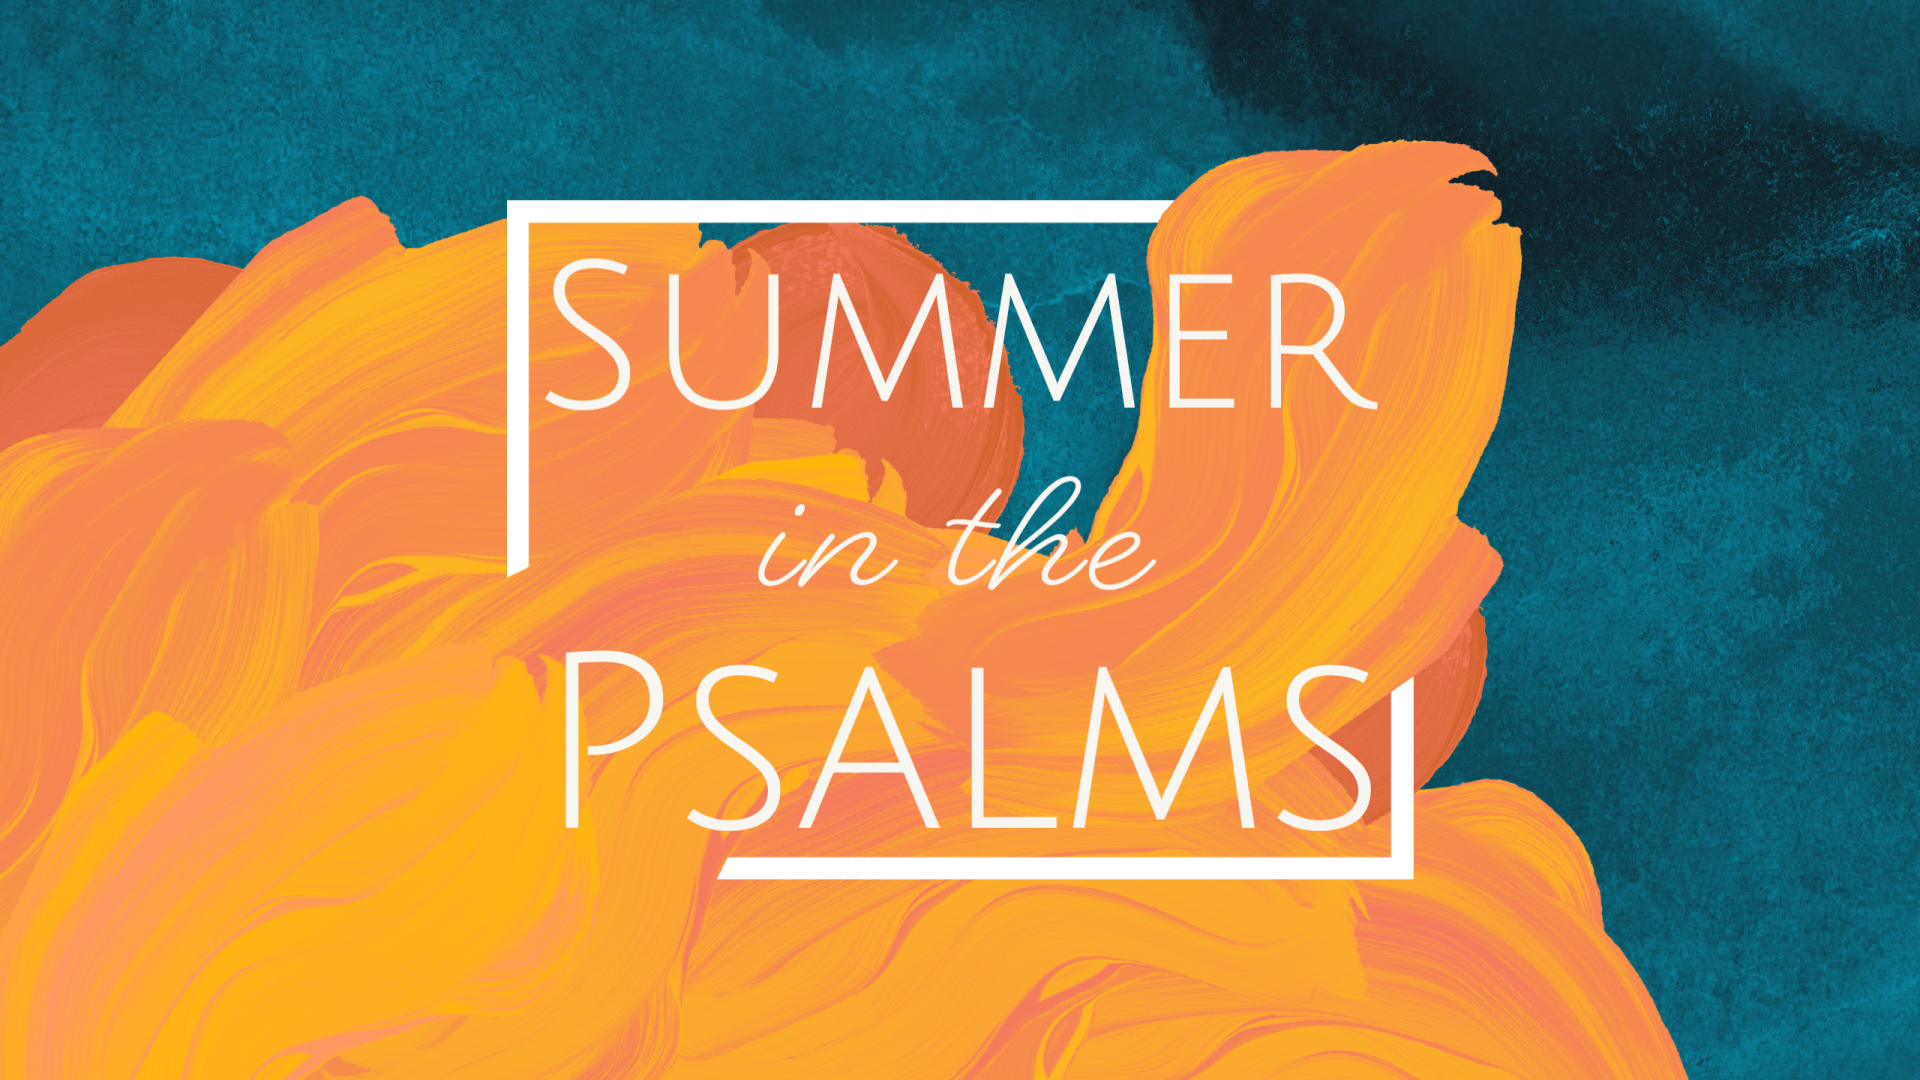 Summer in the Psalms: The Deliverance of the Lord